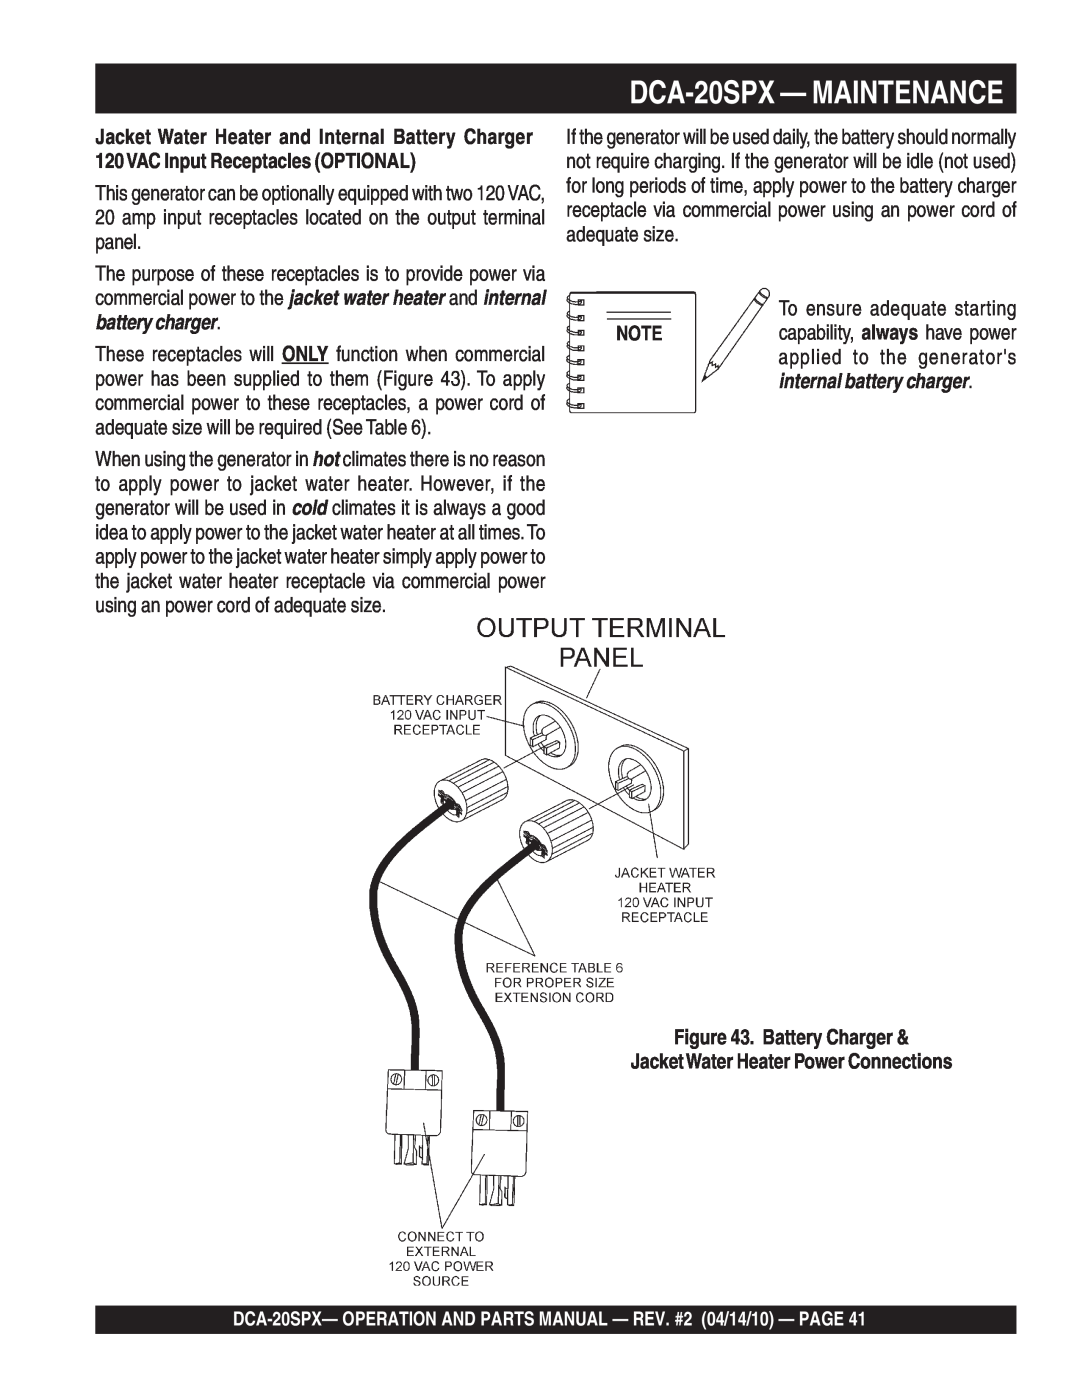 Multiquip operation manual DCA-20SPX - MAINTENANCE, Battery Charger JacketWater Heater Power Connections 